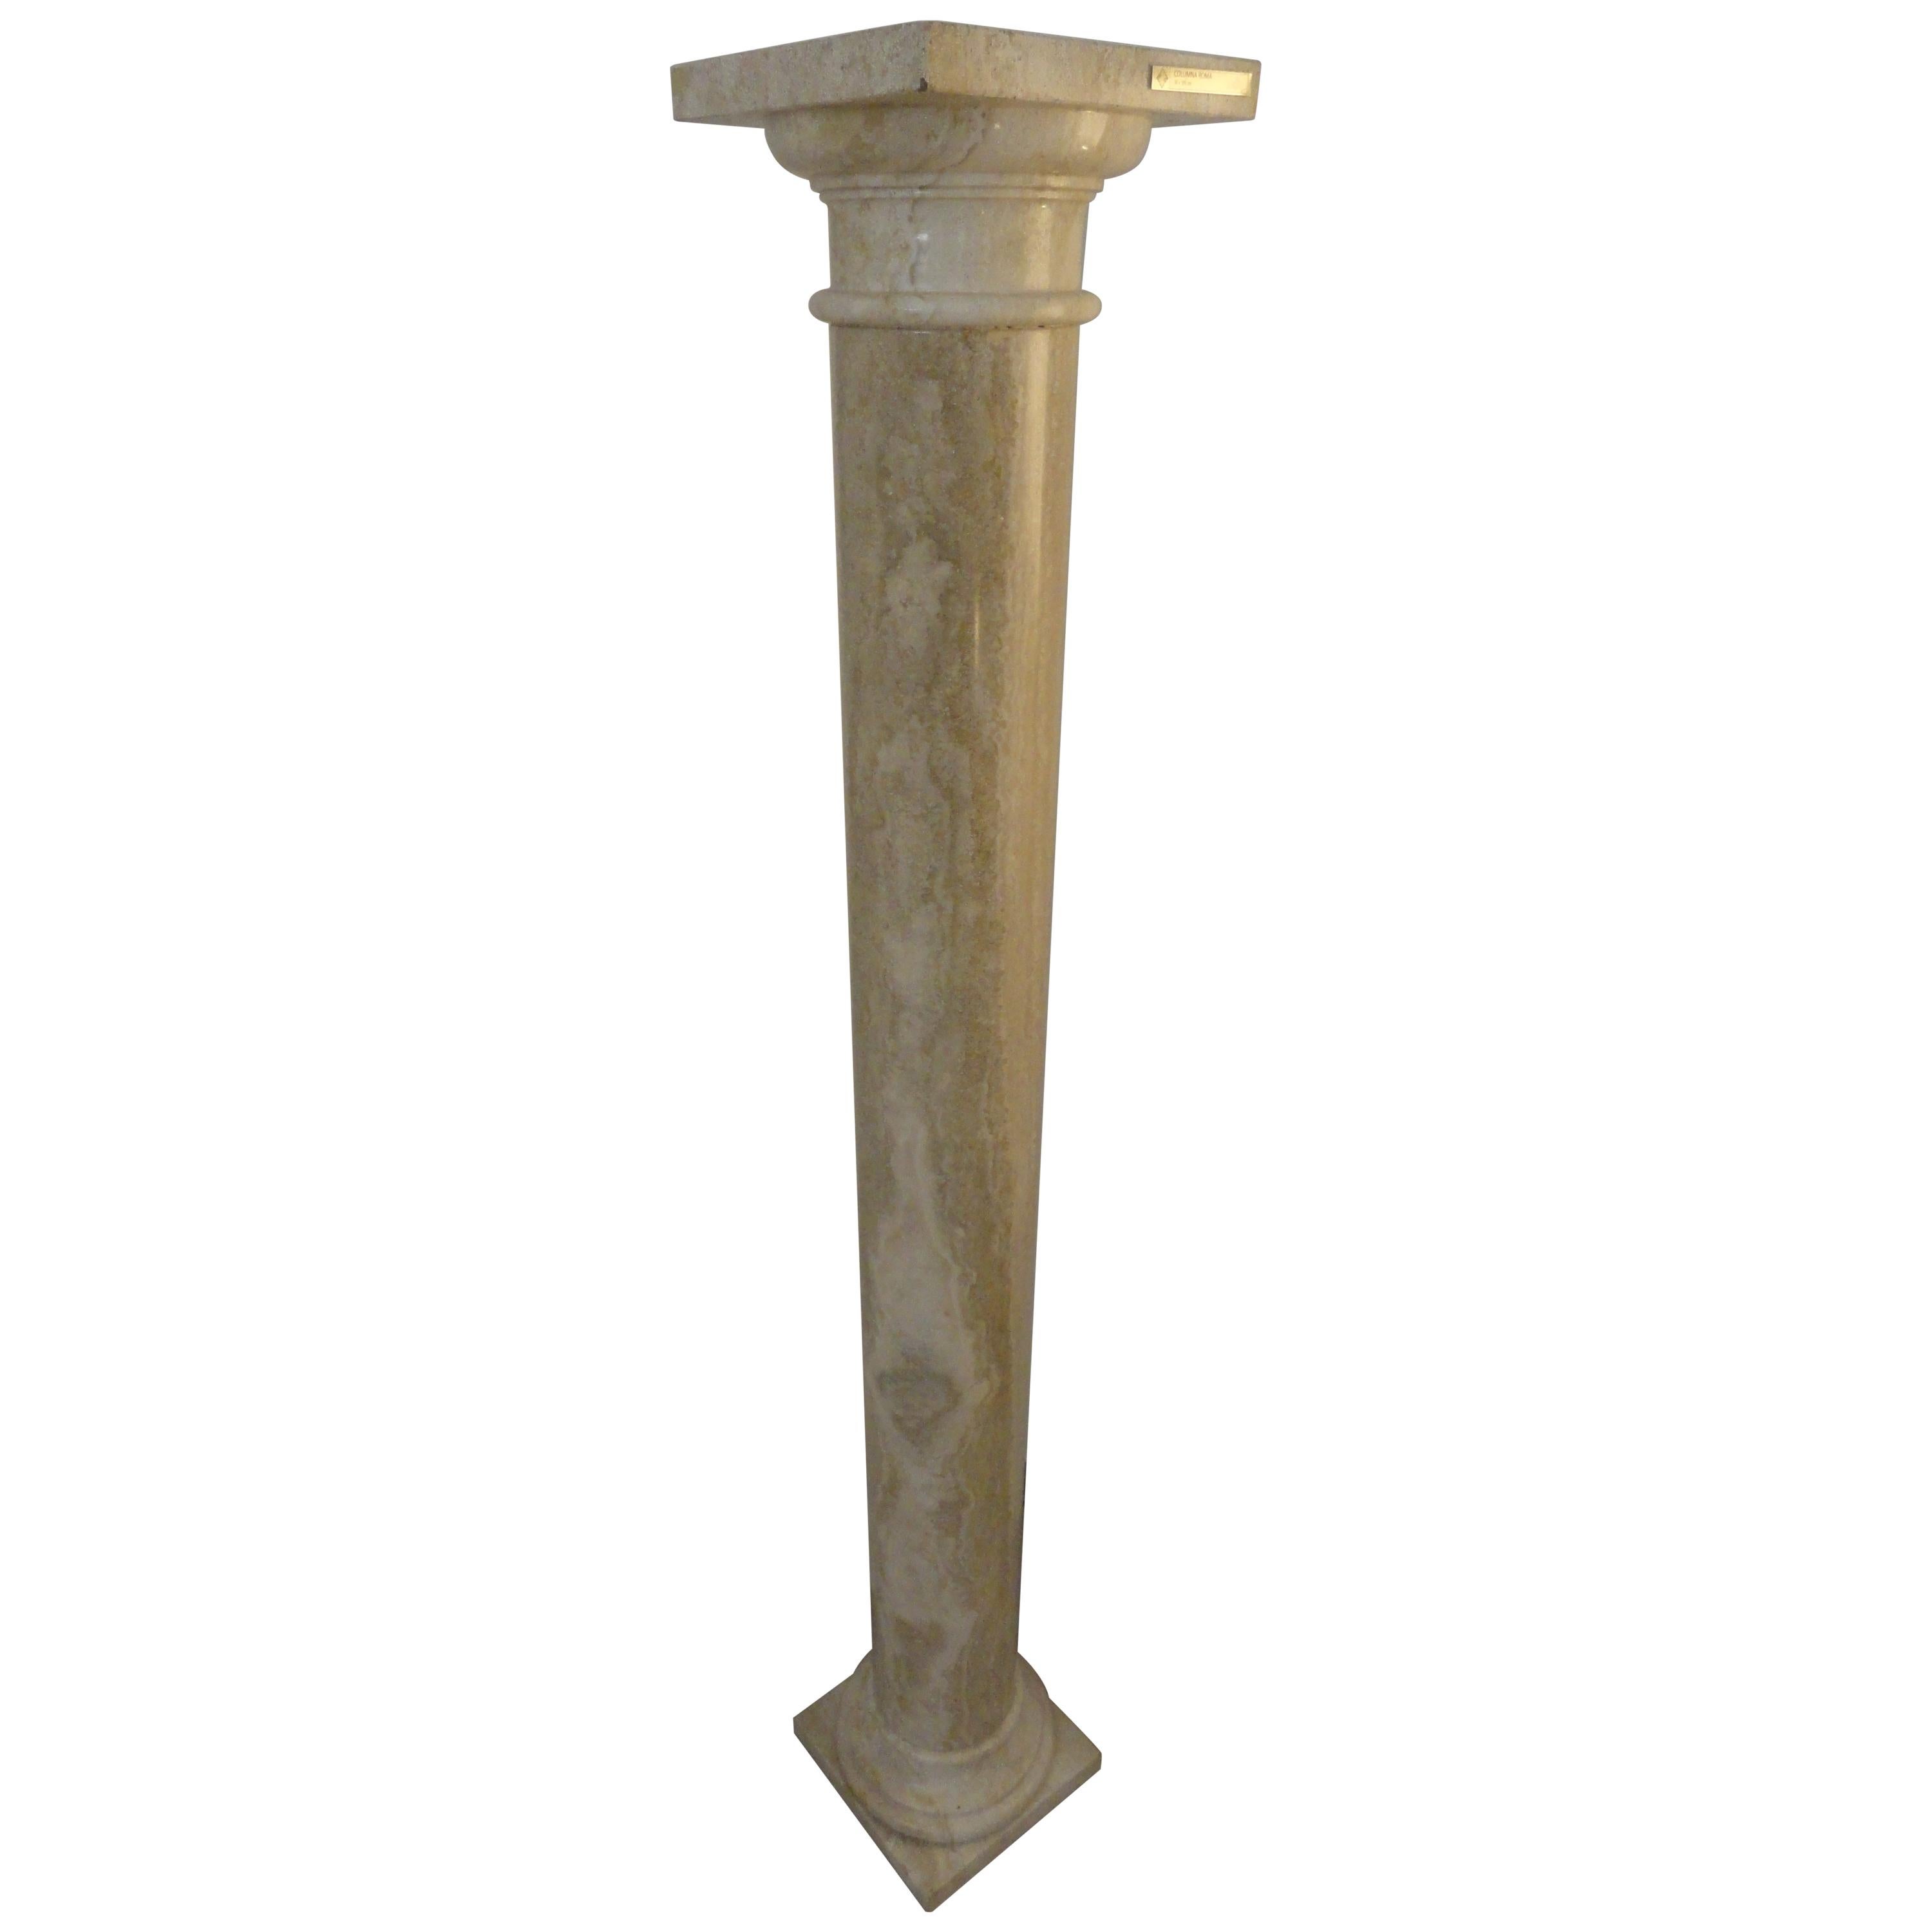 'Roma' Large Column or Pillar in Italian Travertine Limestone by Element&Co. For Sale